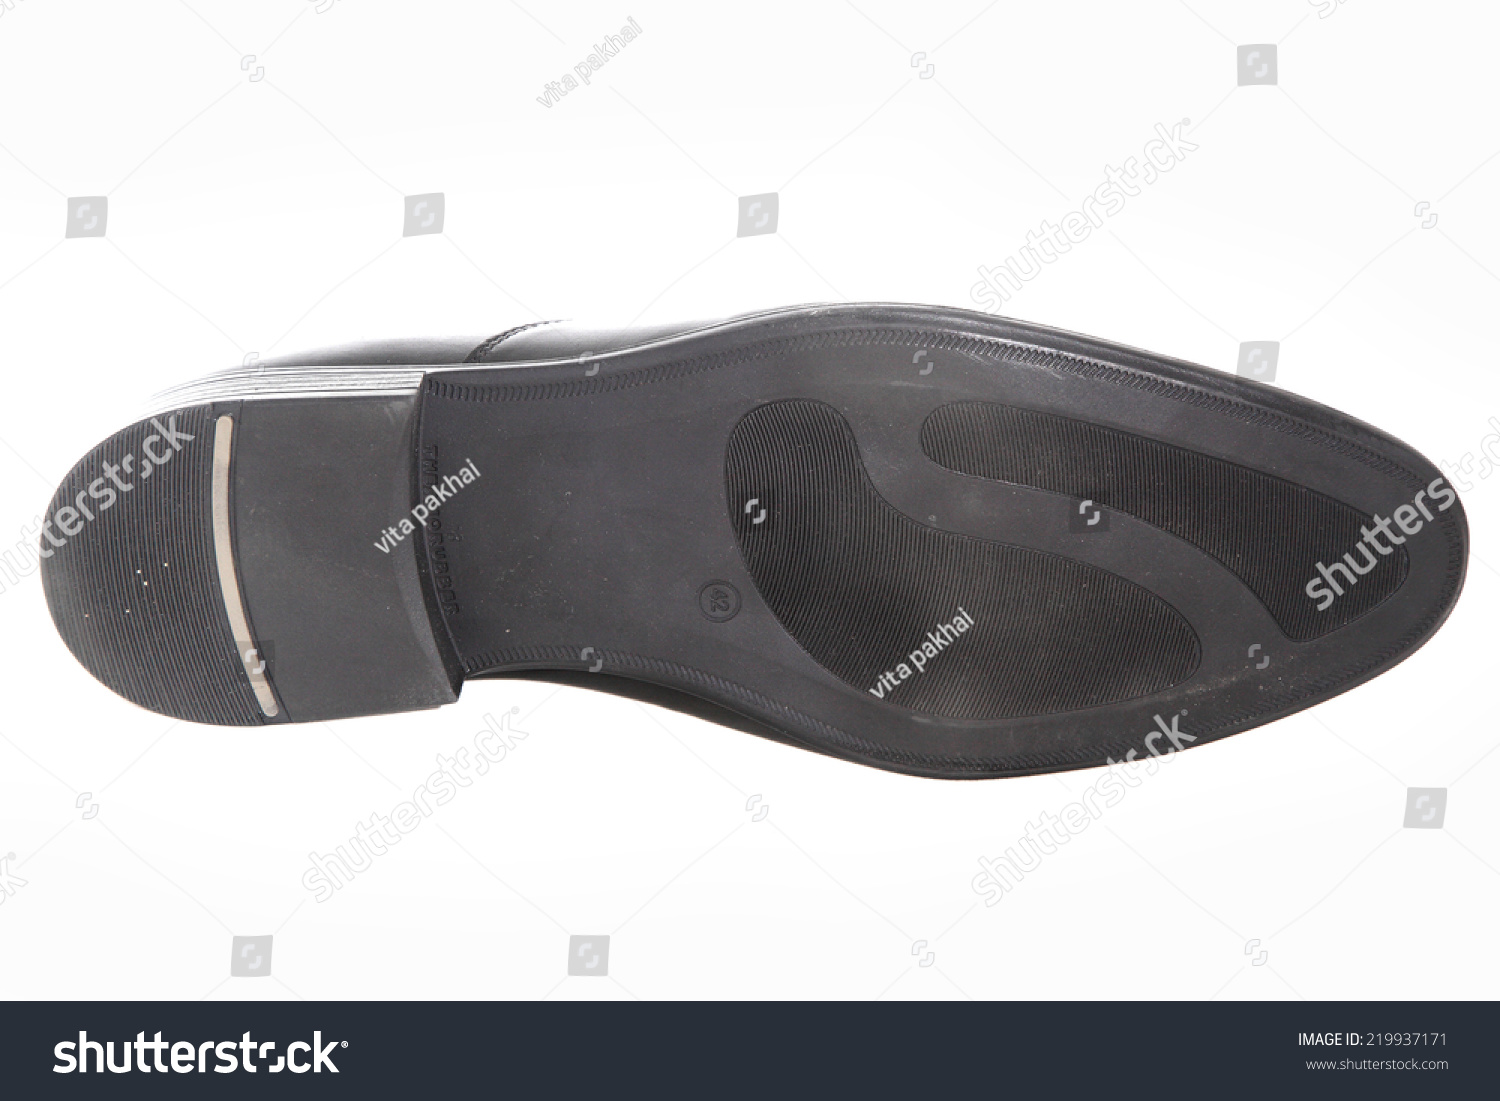 Soles Shoes On White Background Stock Photo (Edit Now) 219937171